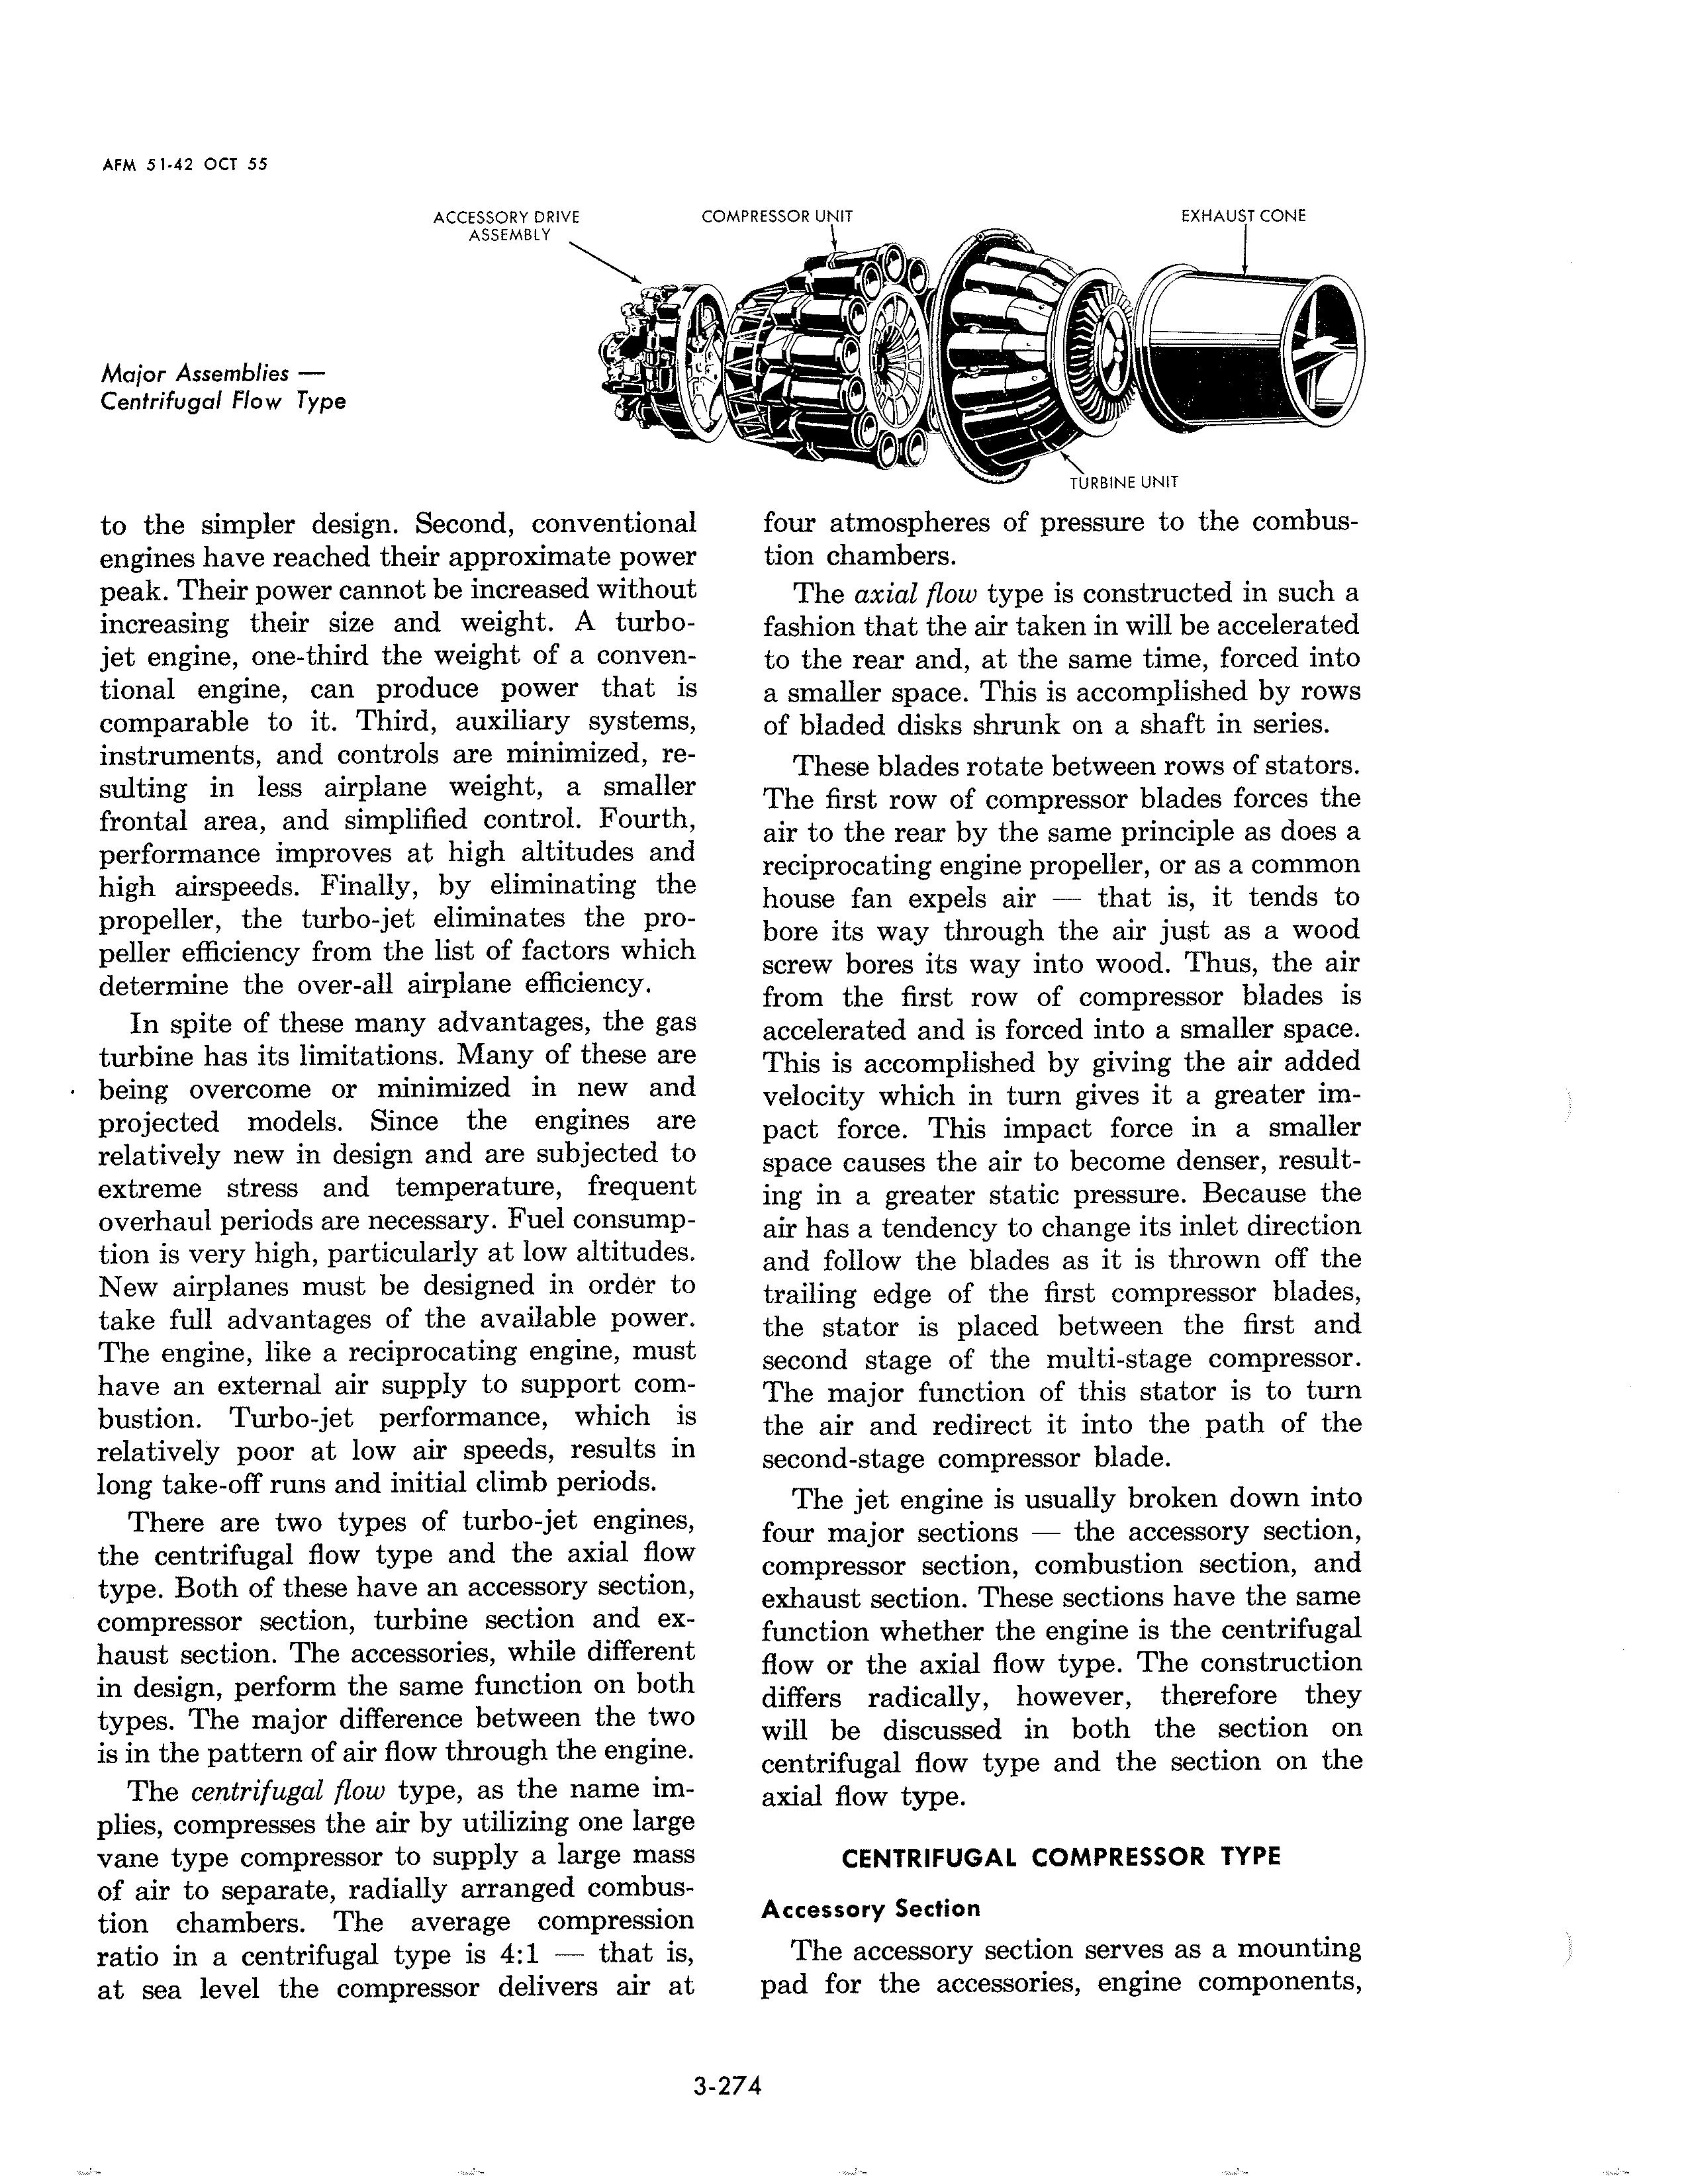 Sample page 278 from AirCorps Library document: Aircraft Engineering for Pilots